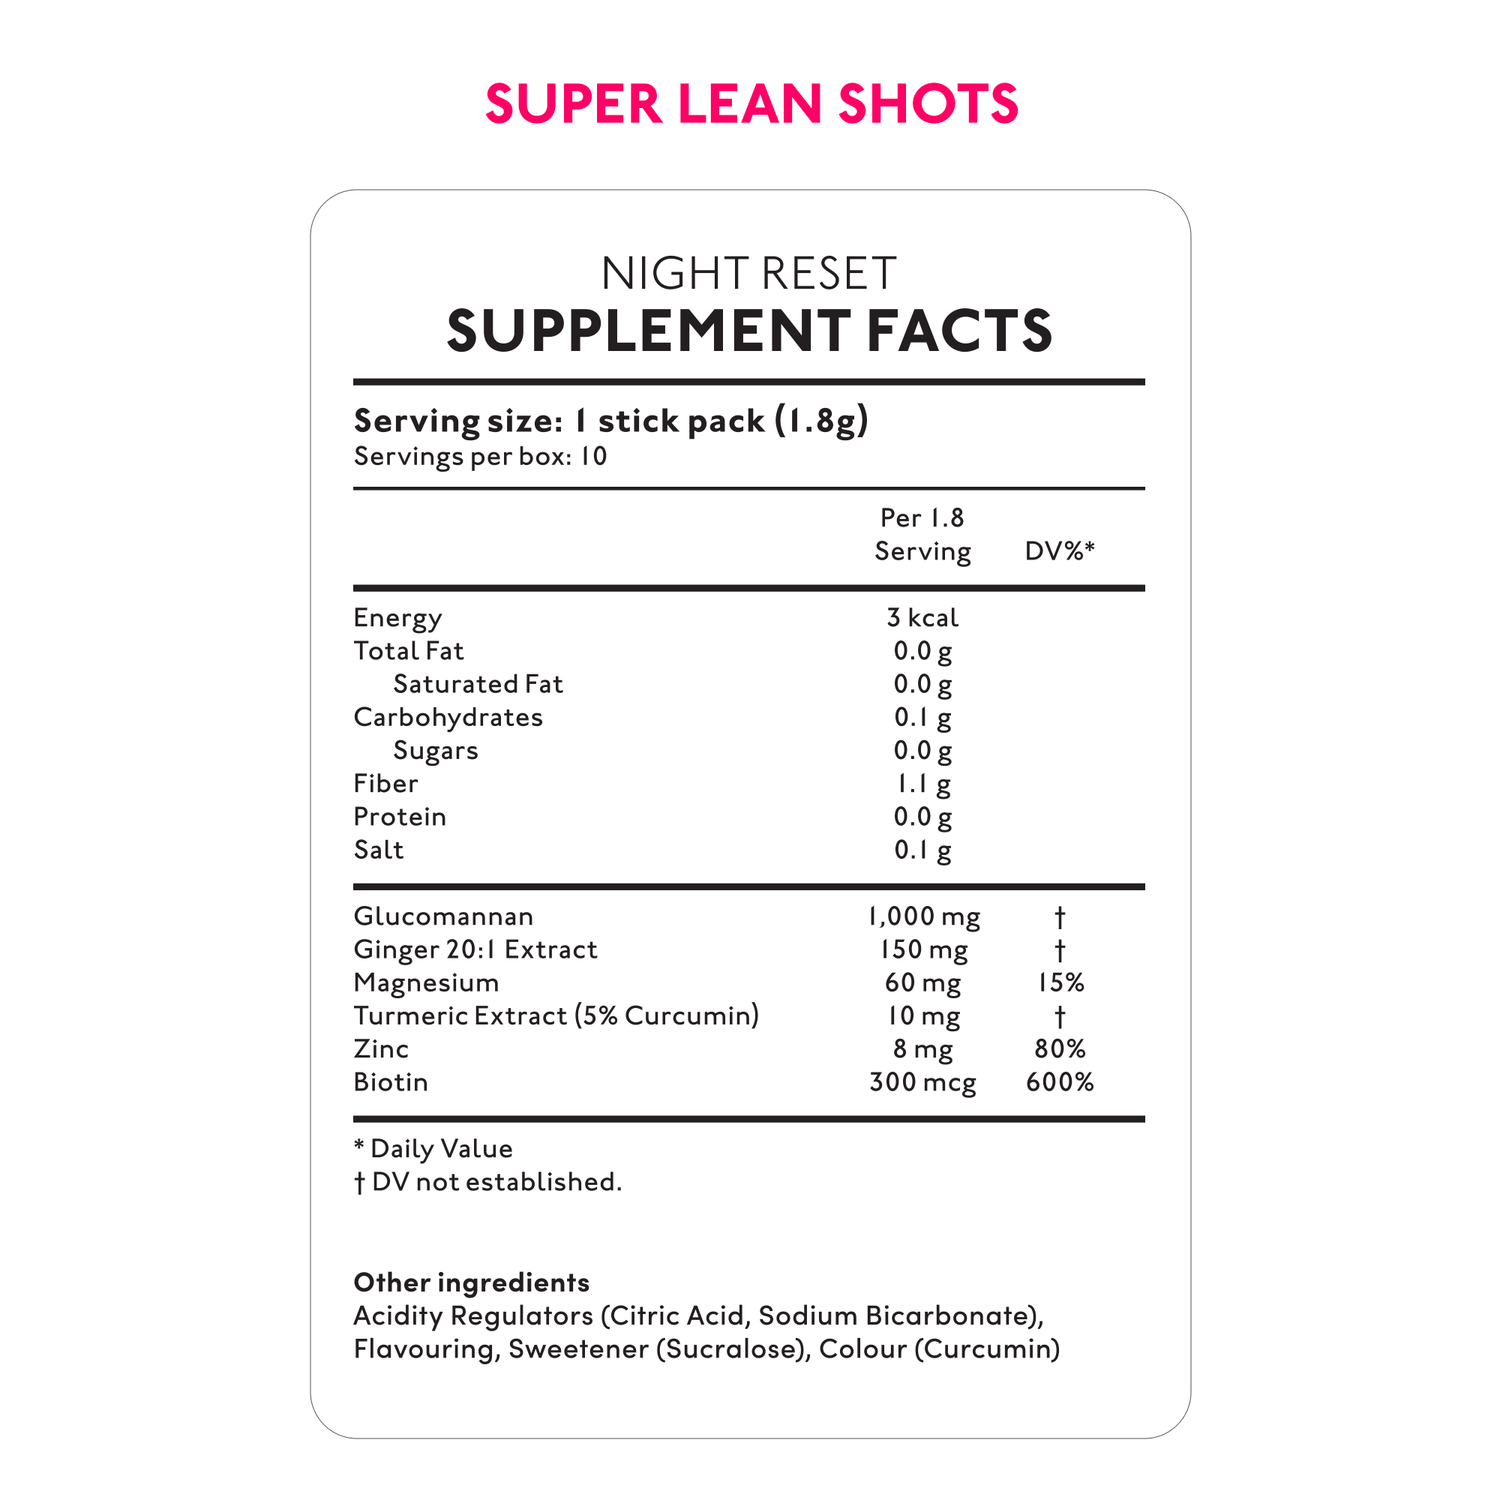 Night Reset Supplement Facts